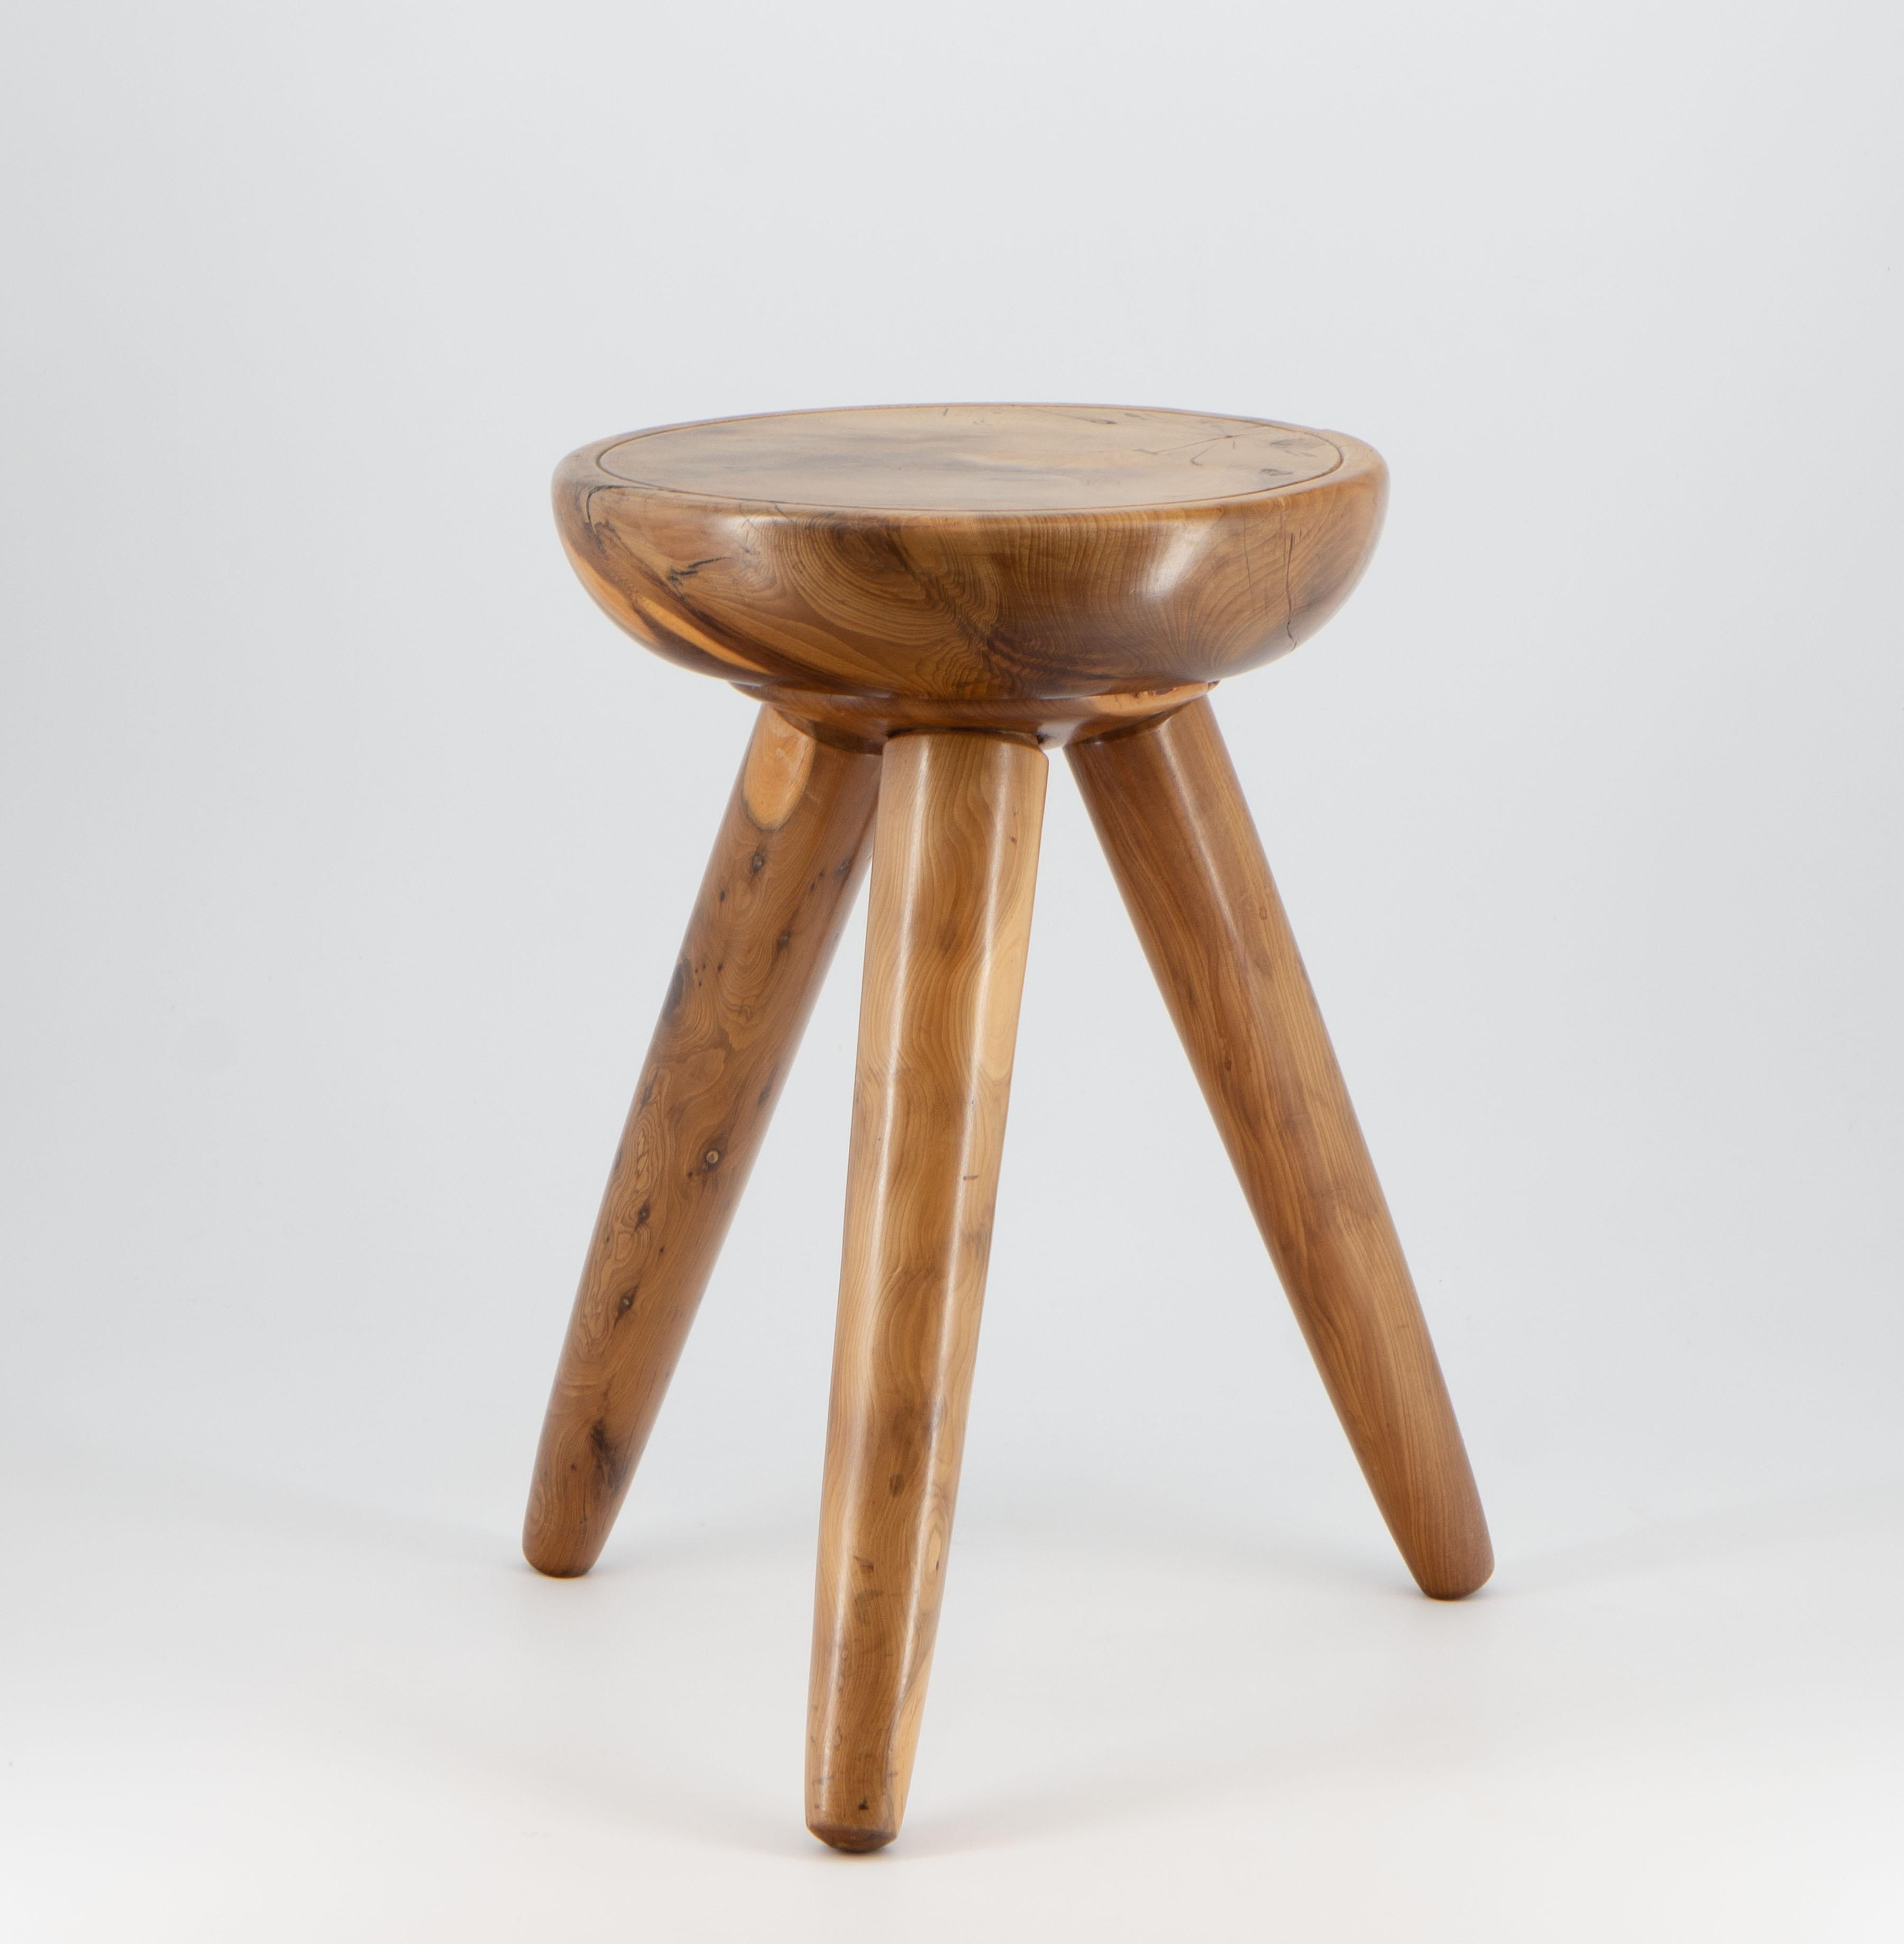 20th Century Midcentury Yew Low Table Stool Perriand Manner  For Sale